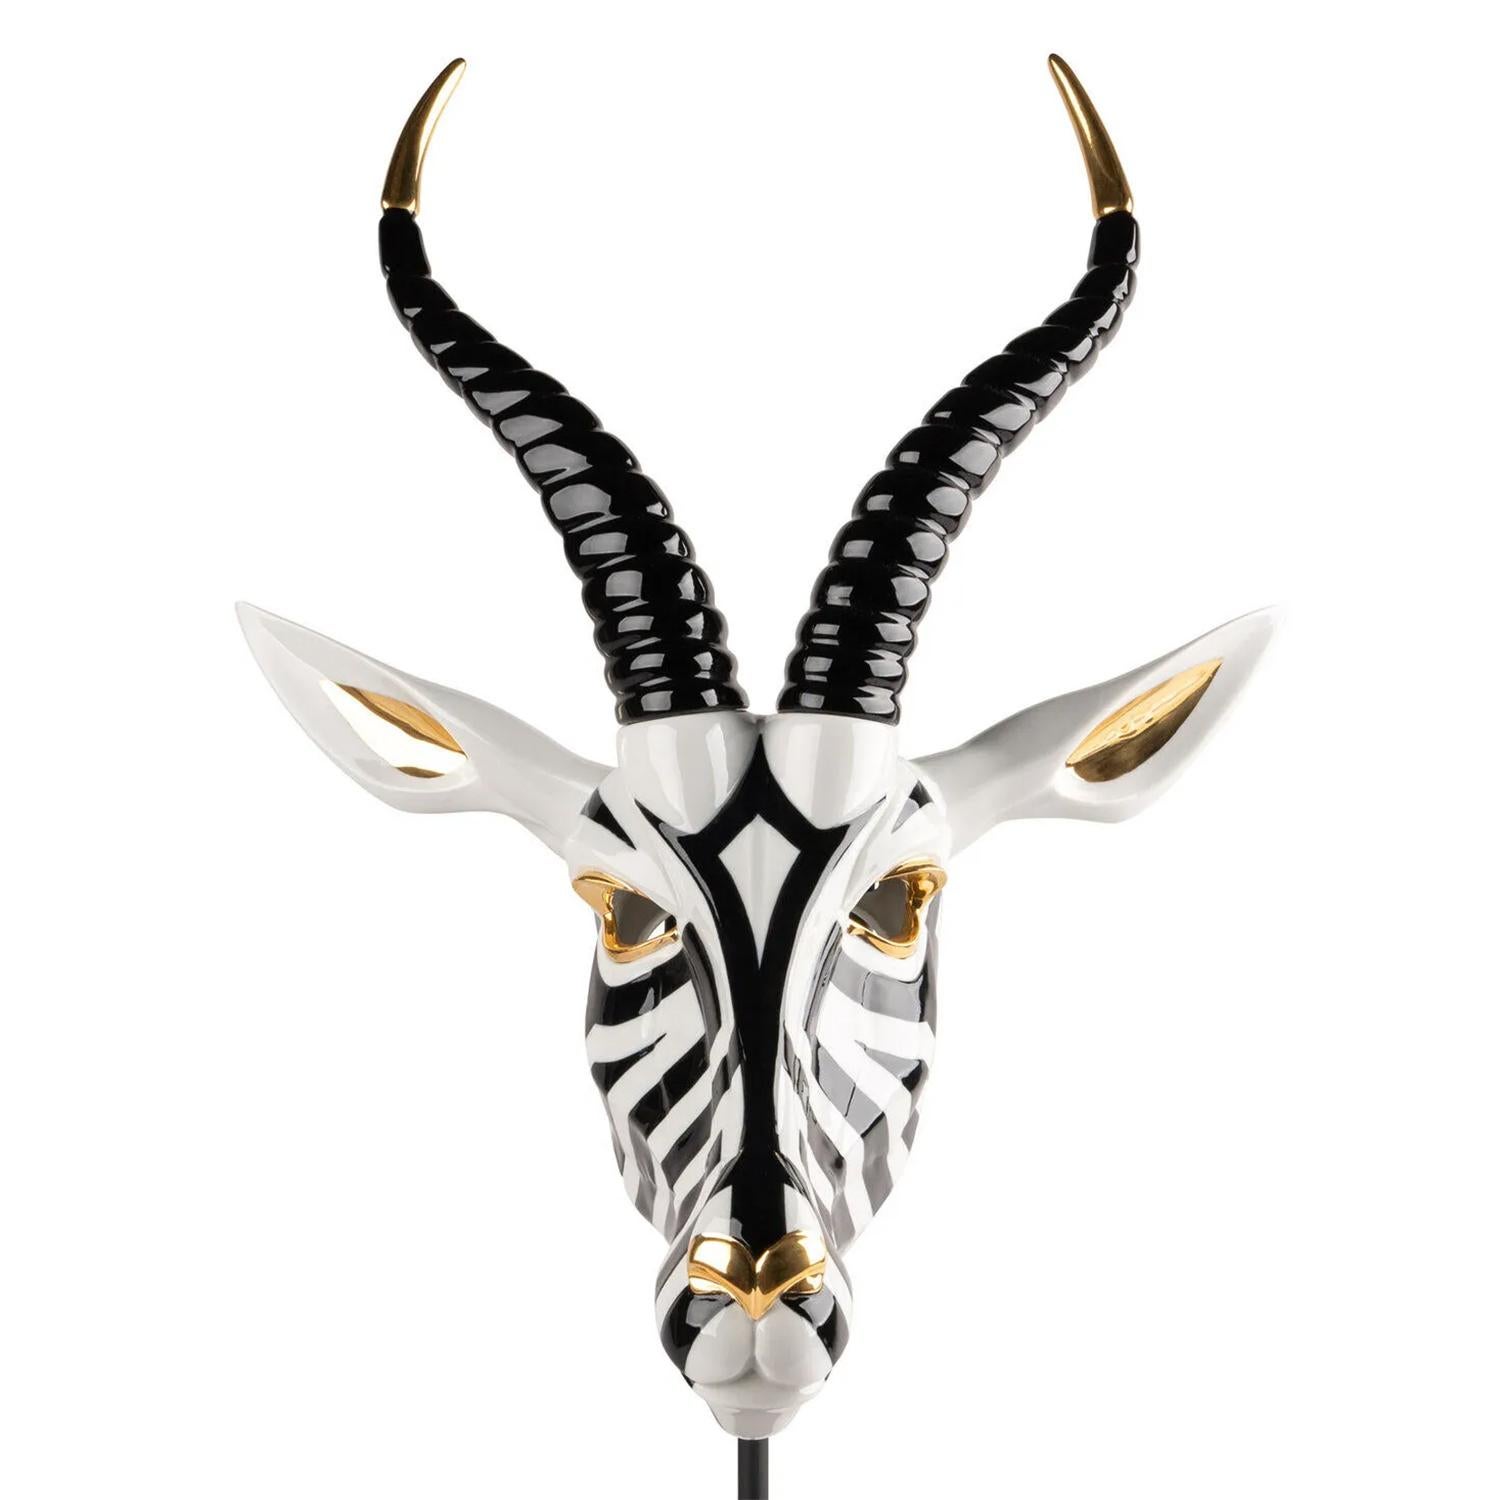 Hand-Crafted Springbok Head Sculpture For Sale